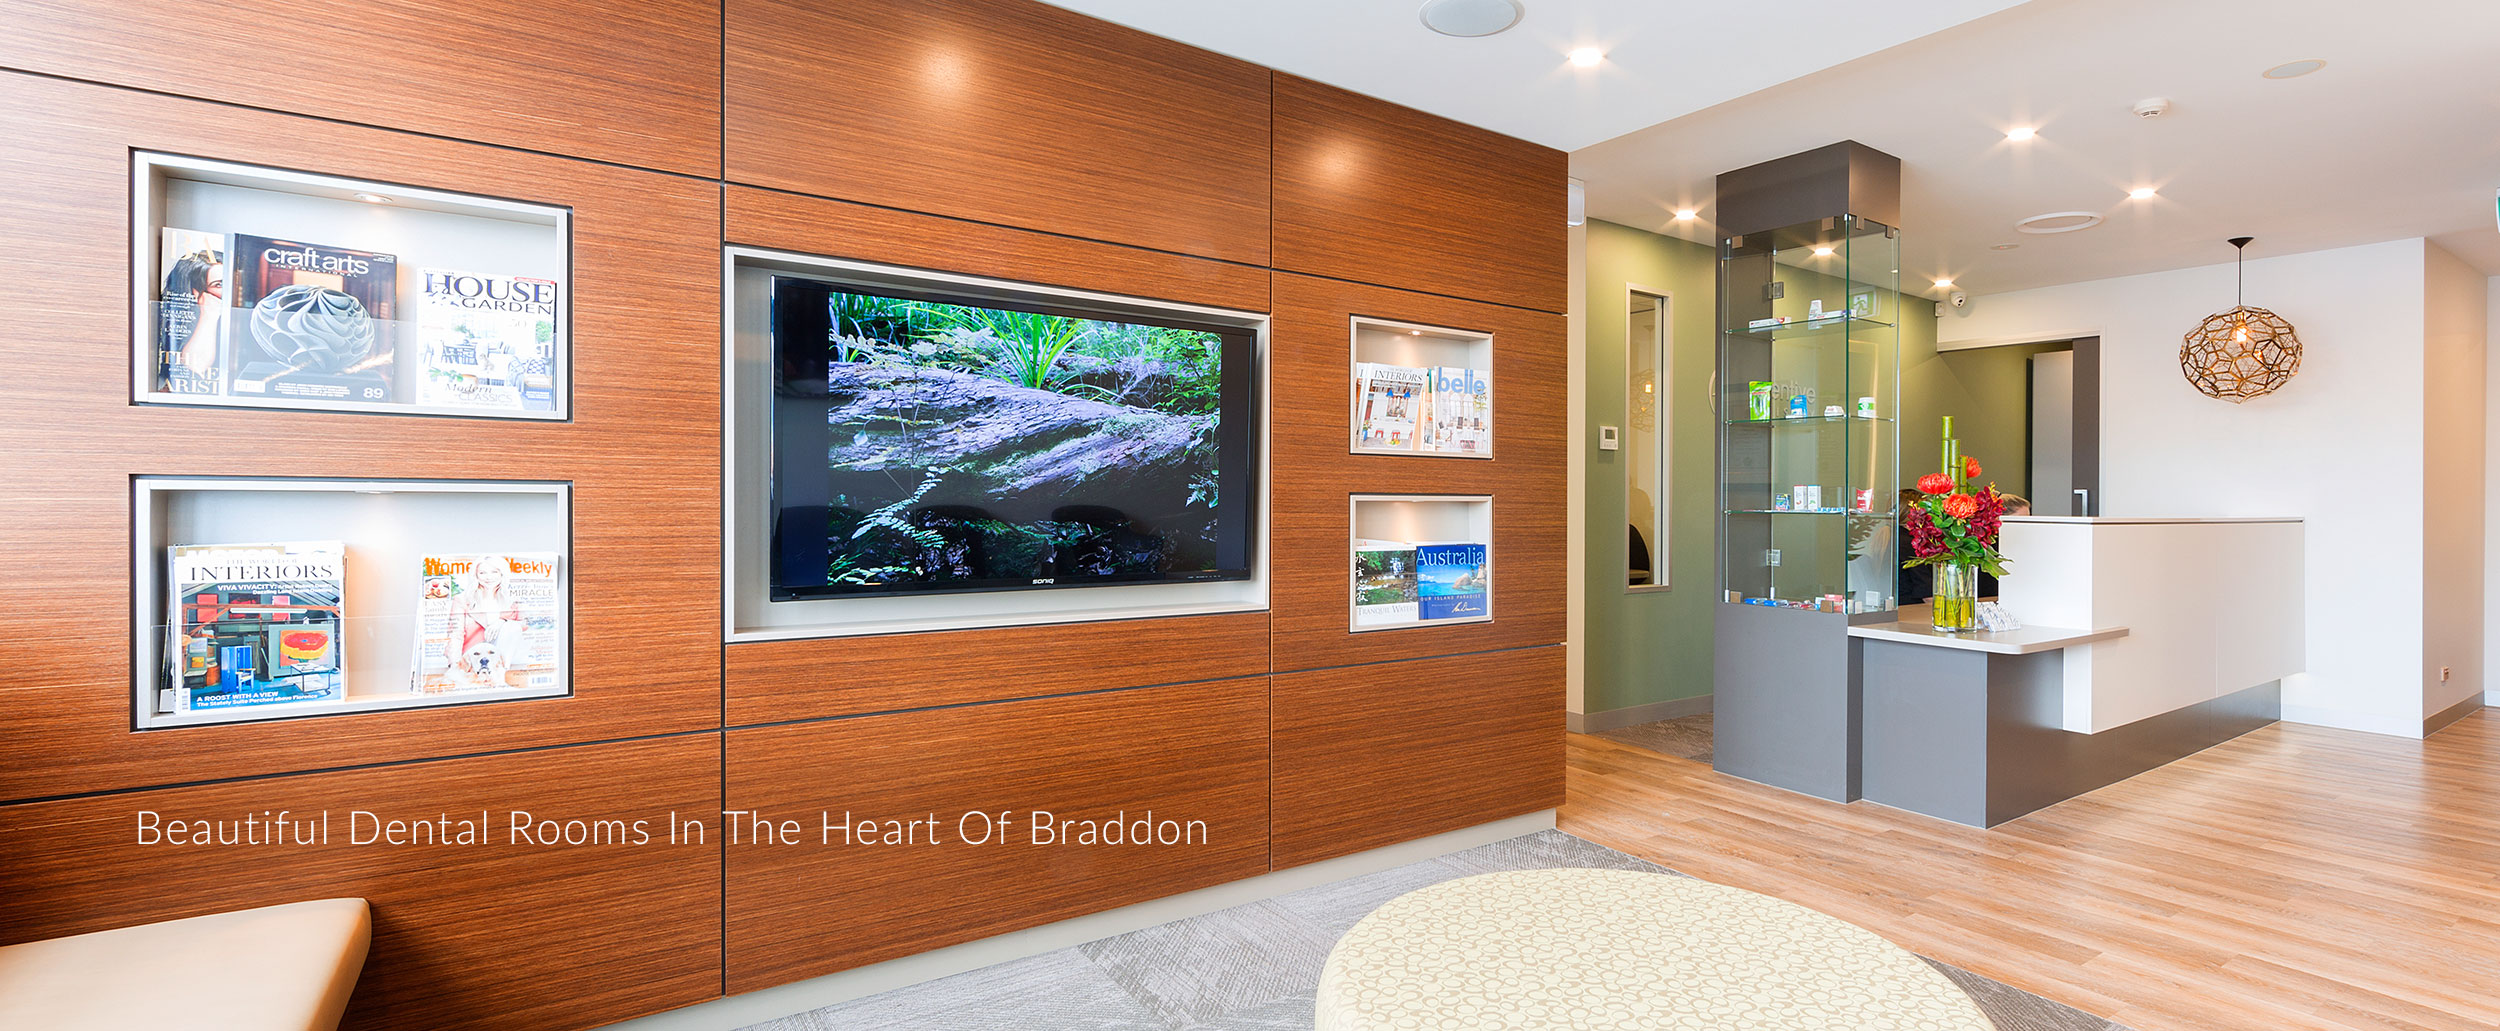 Welcome To Our Beautiful Dental Rooms In The Heart of Braddon, Near Canberra City